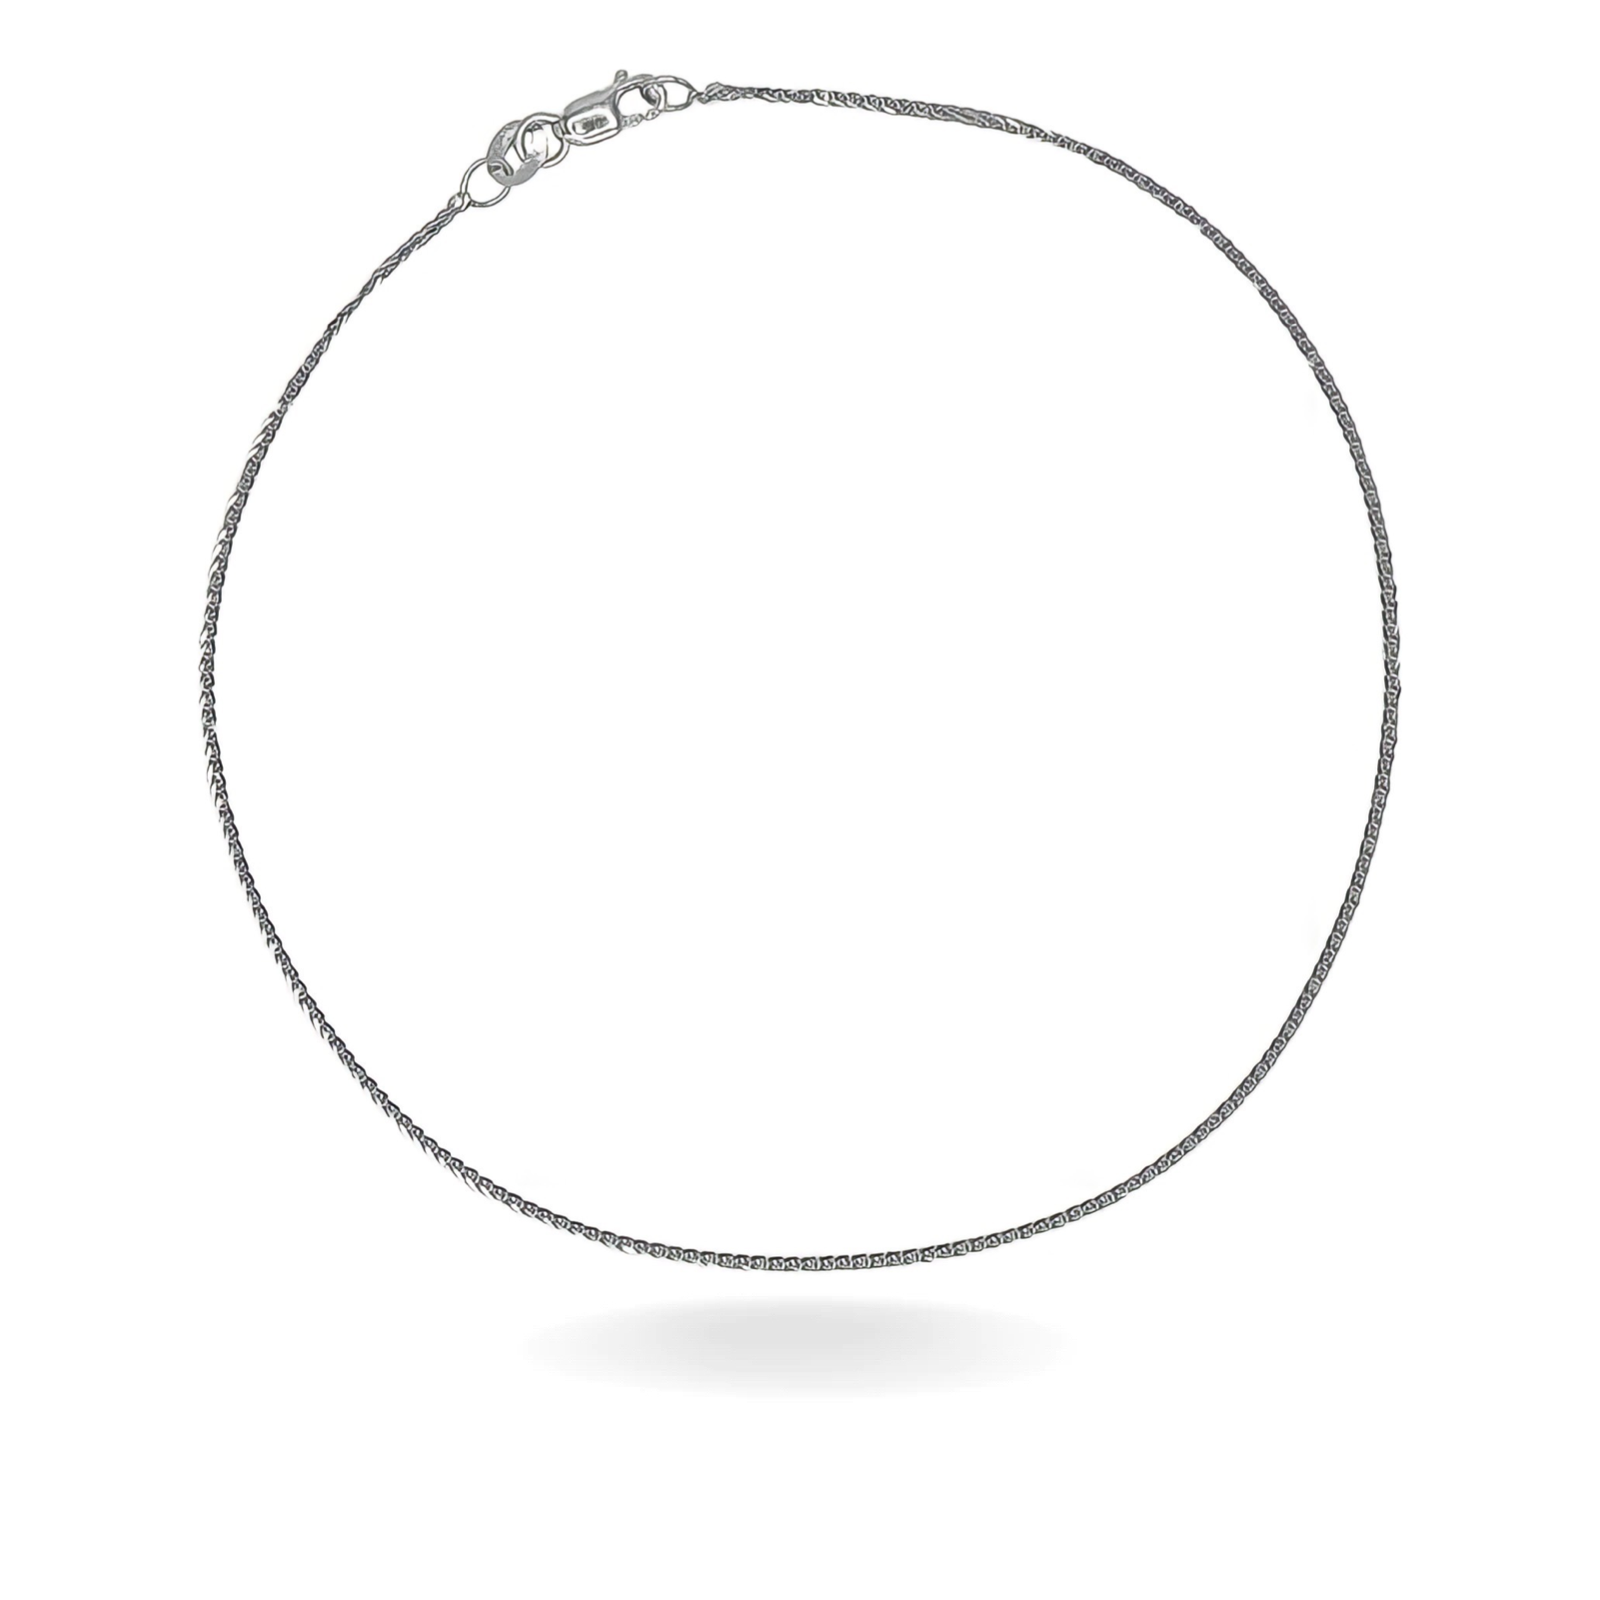 14K WHITE GOLD WHEAT CHAIN ANKLET